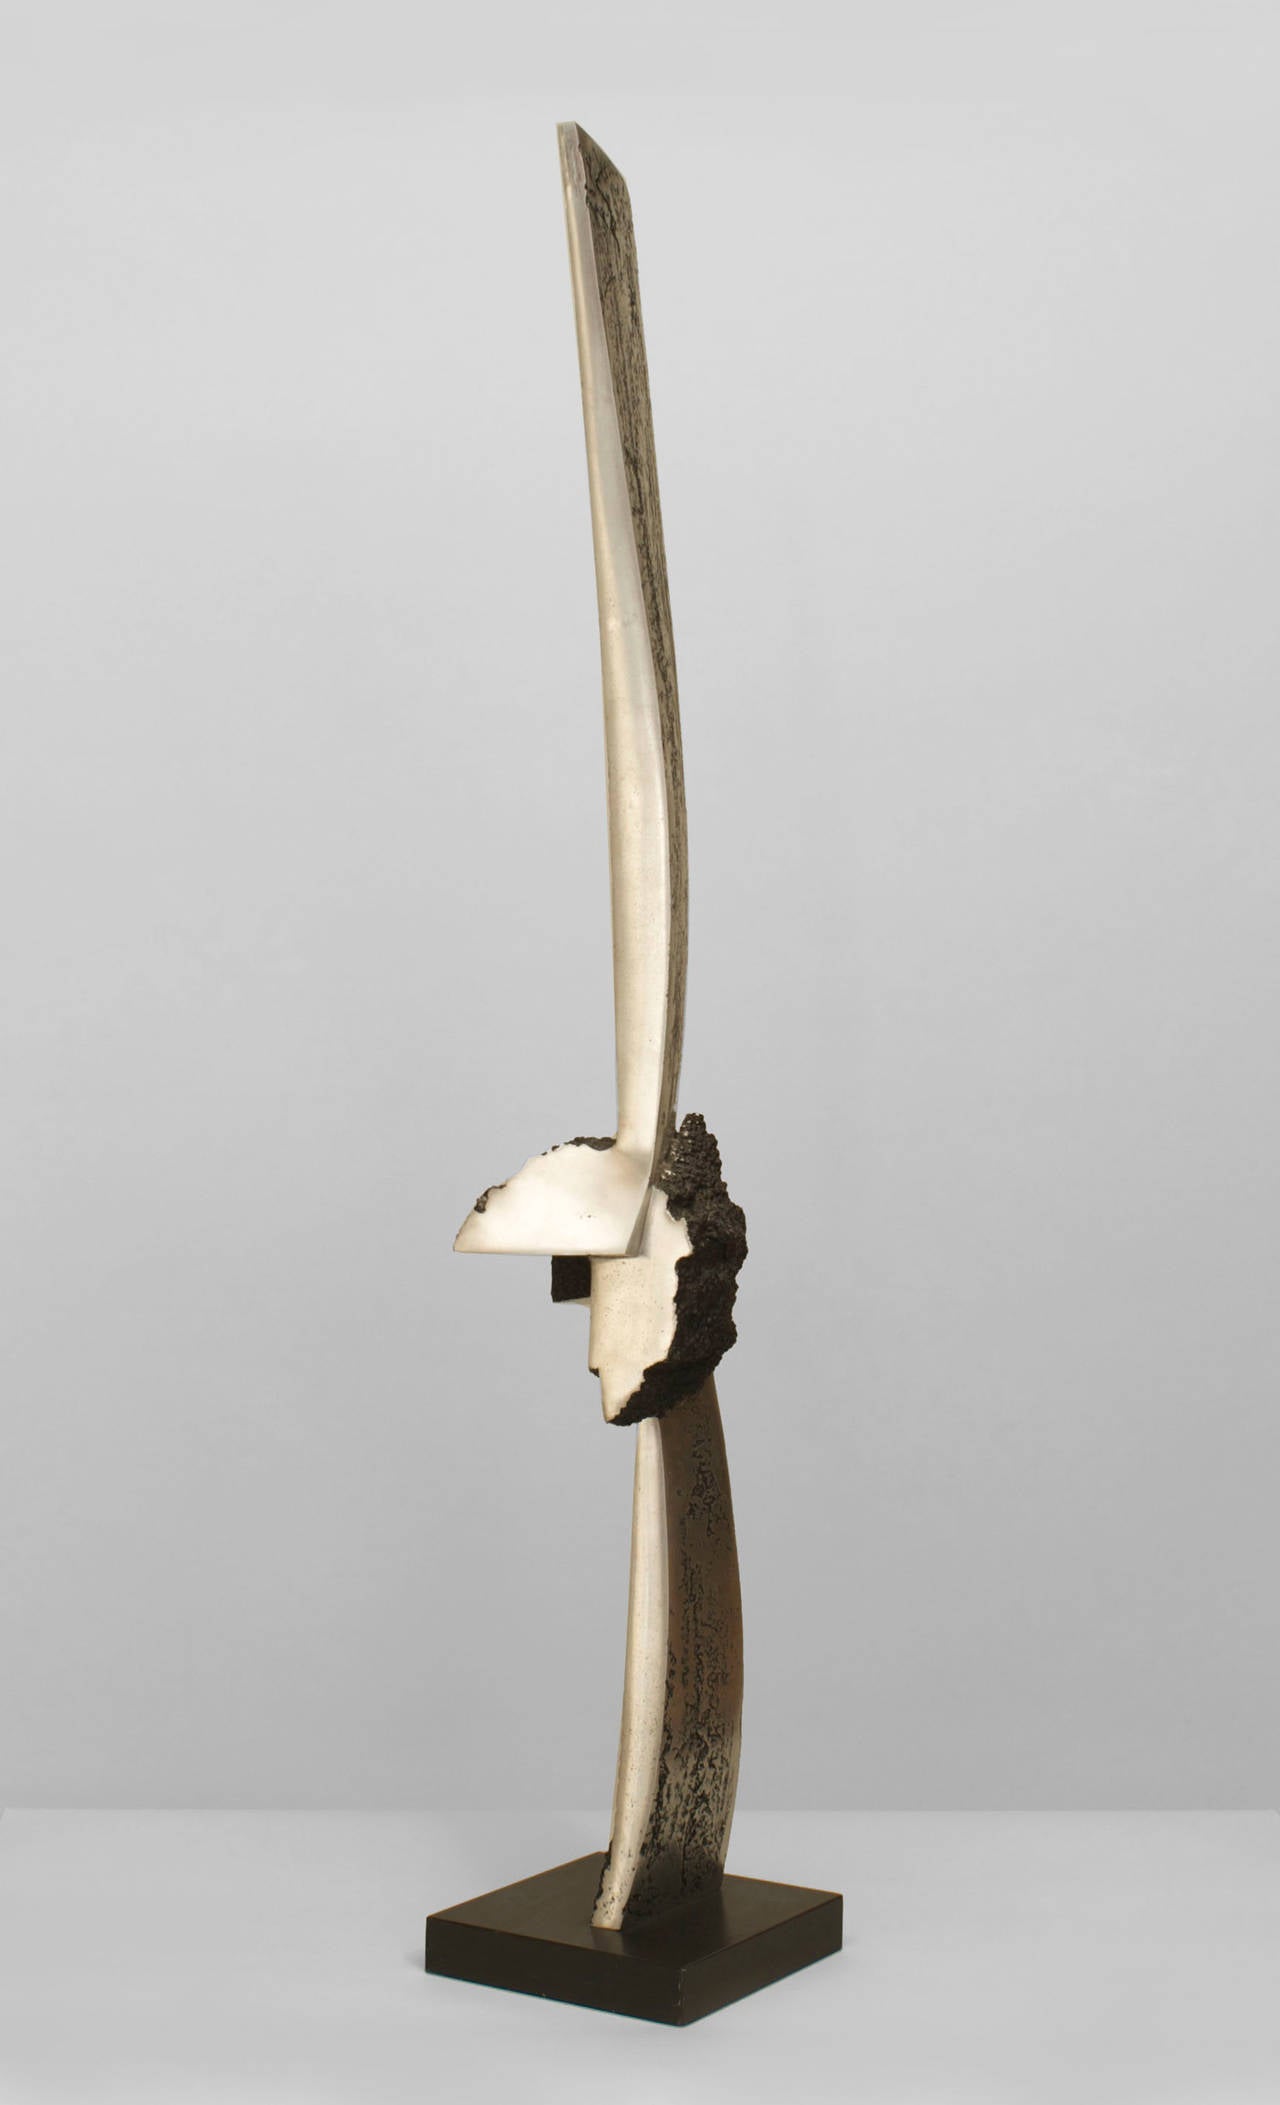 Brutalist American Abstract Aluminum Sculpture by James C. Myford, 1983